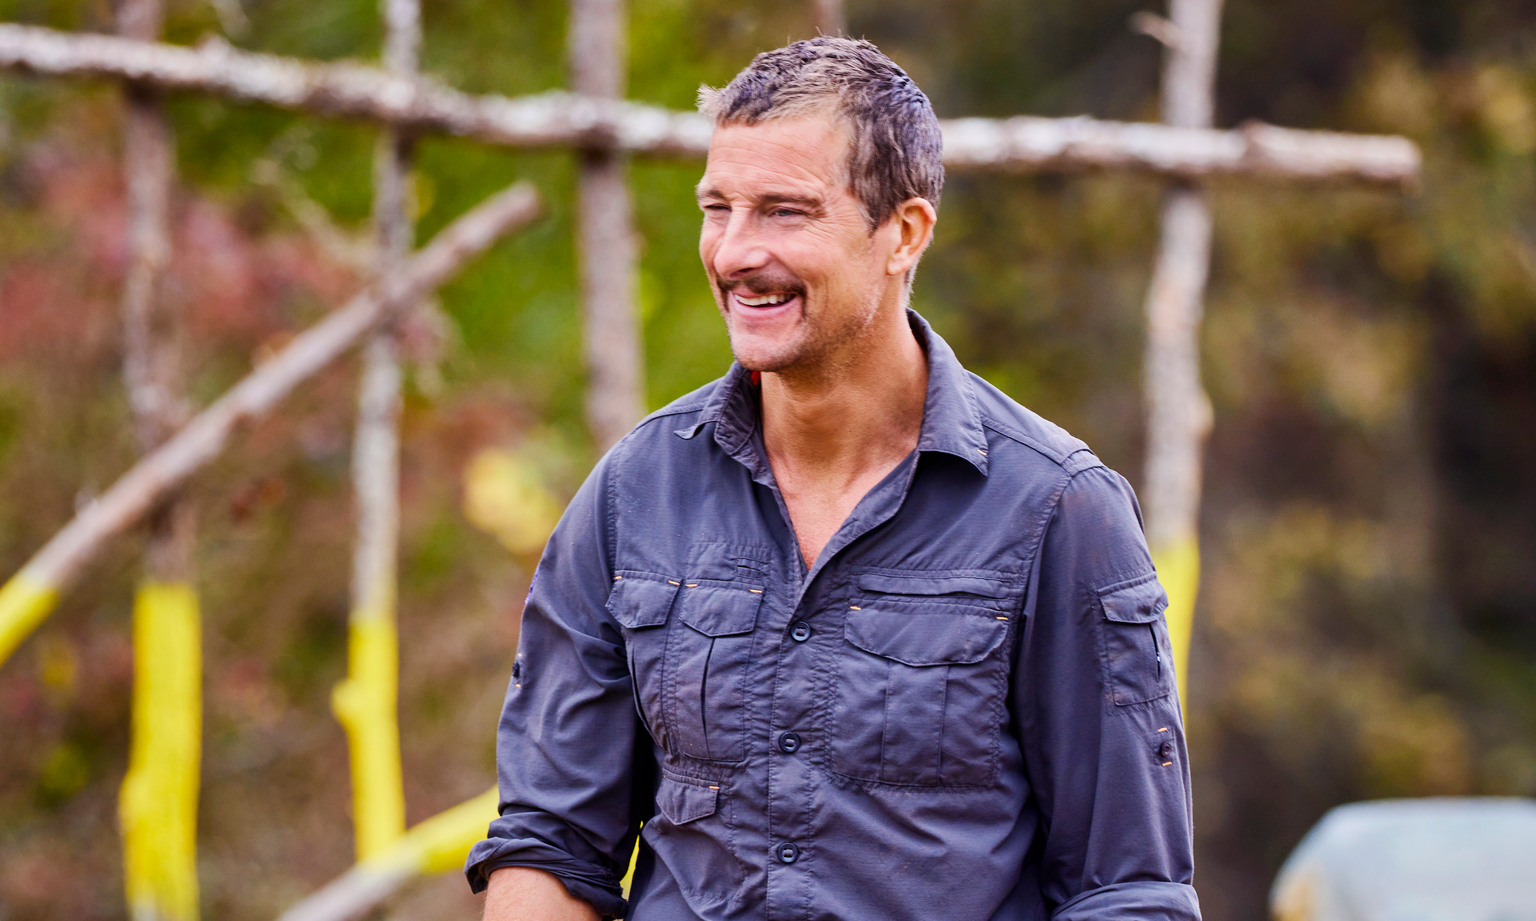 TBS' NEW COMPETITION SERIES “I SURVIVED BEAR GRYLLS” TO PREMIERE ON  THURSDAY, MAY 18